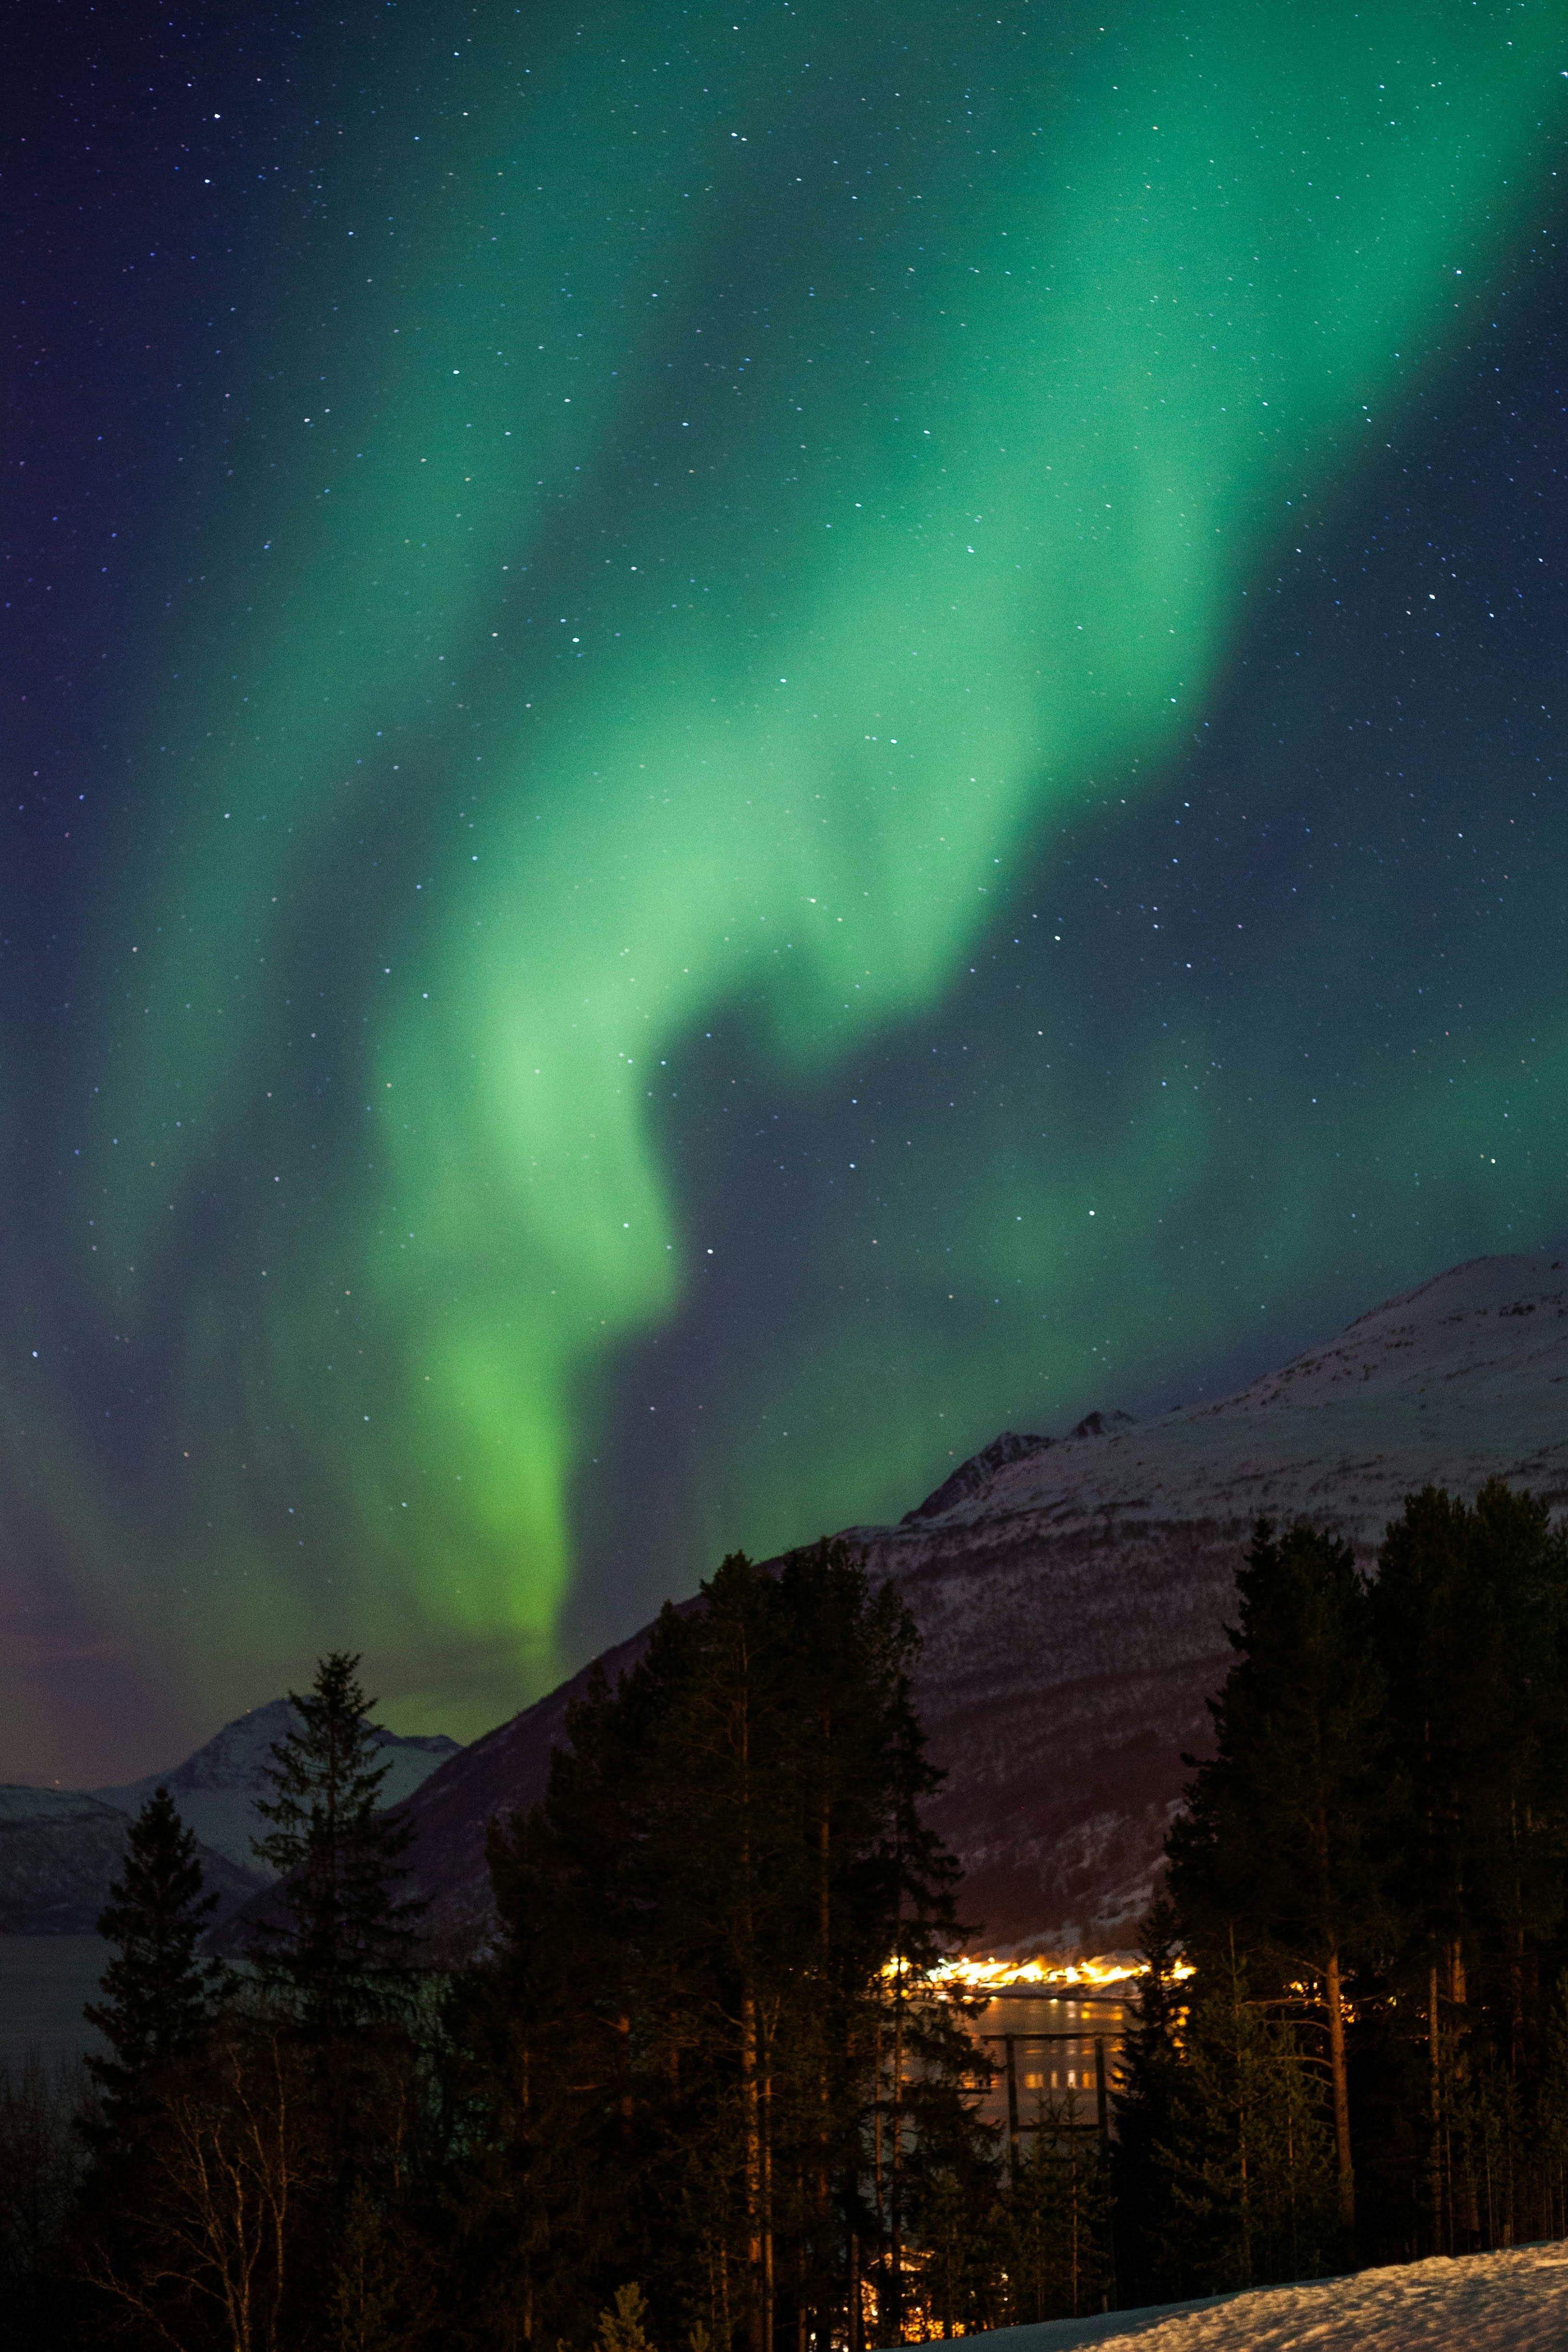 When is the best time to see the northern lights